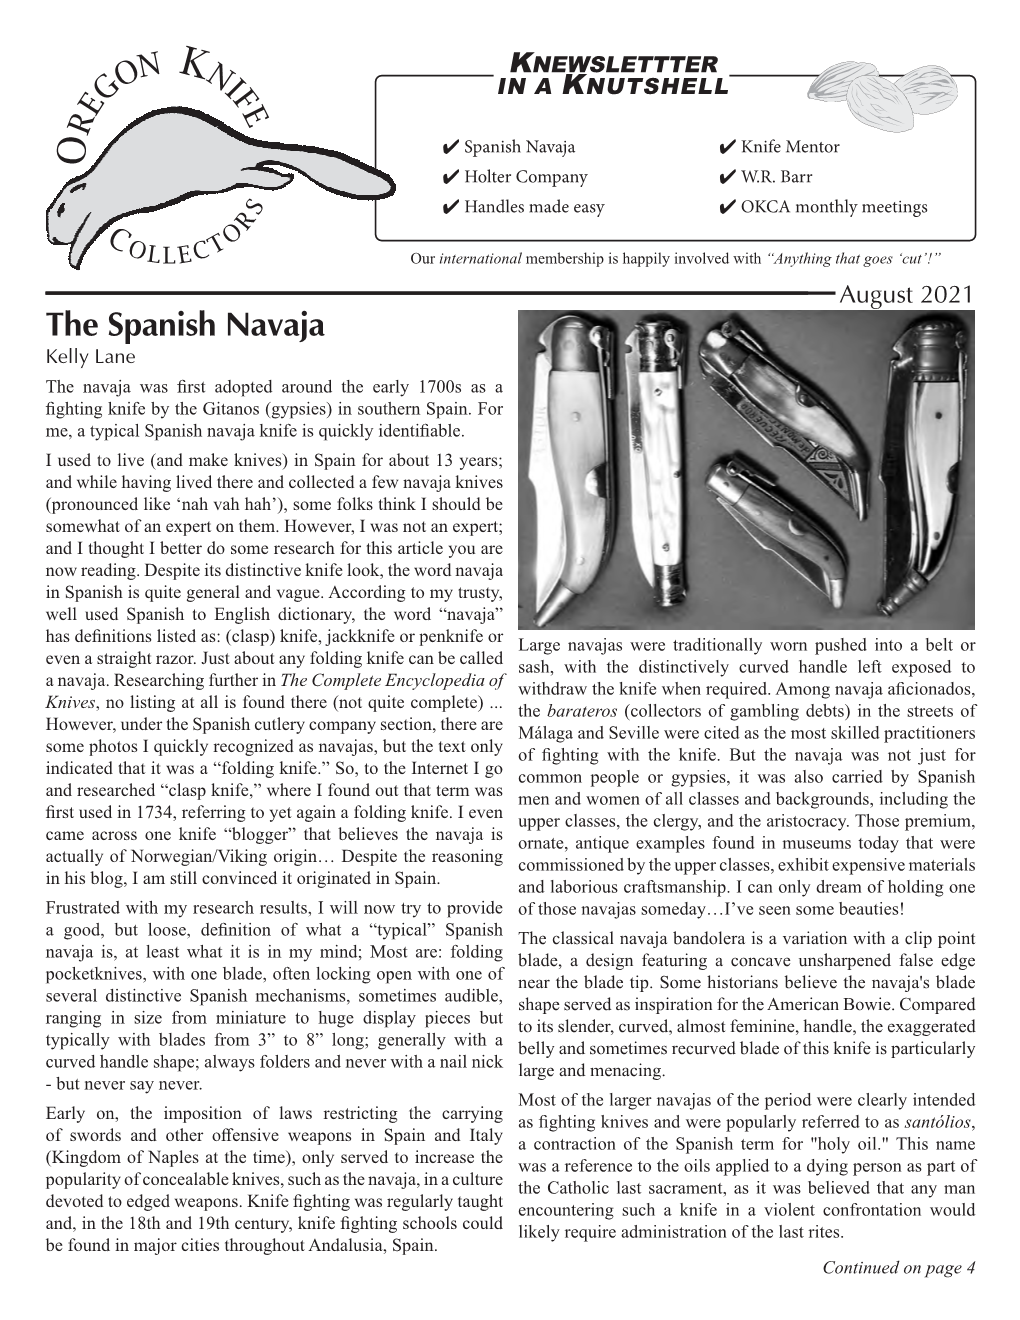 The Spanish Navaja Kelly Lane the Navaja Was First Adopted Around the Early 1700S Asa Fighting Knife by the Gitanos (Gypsies) in Southern Spain